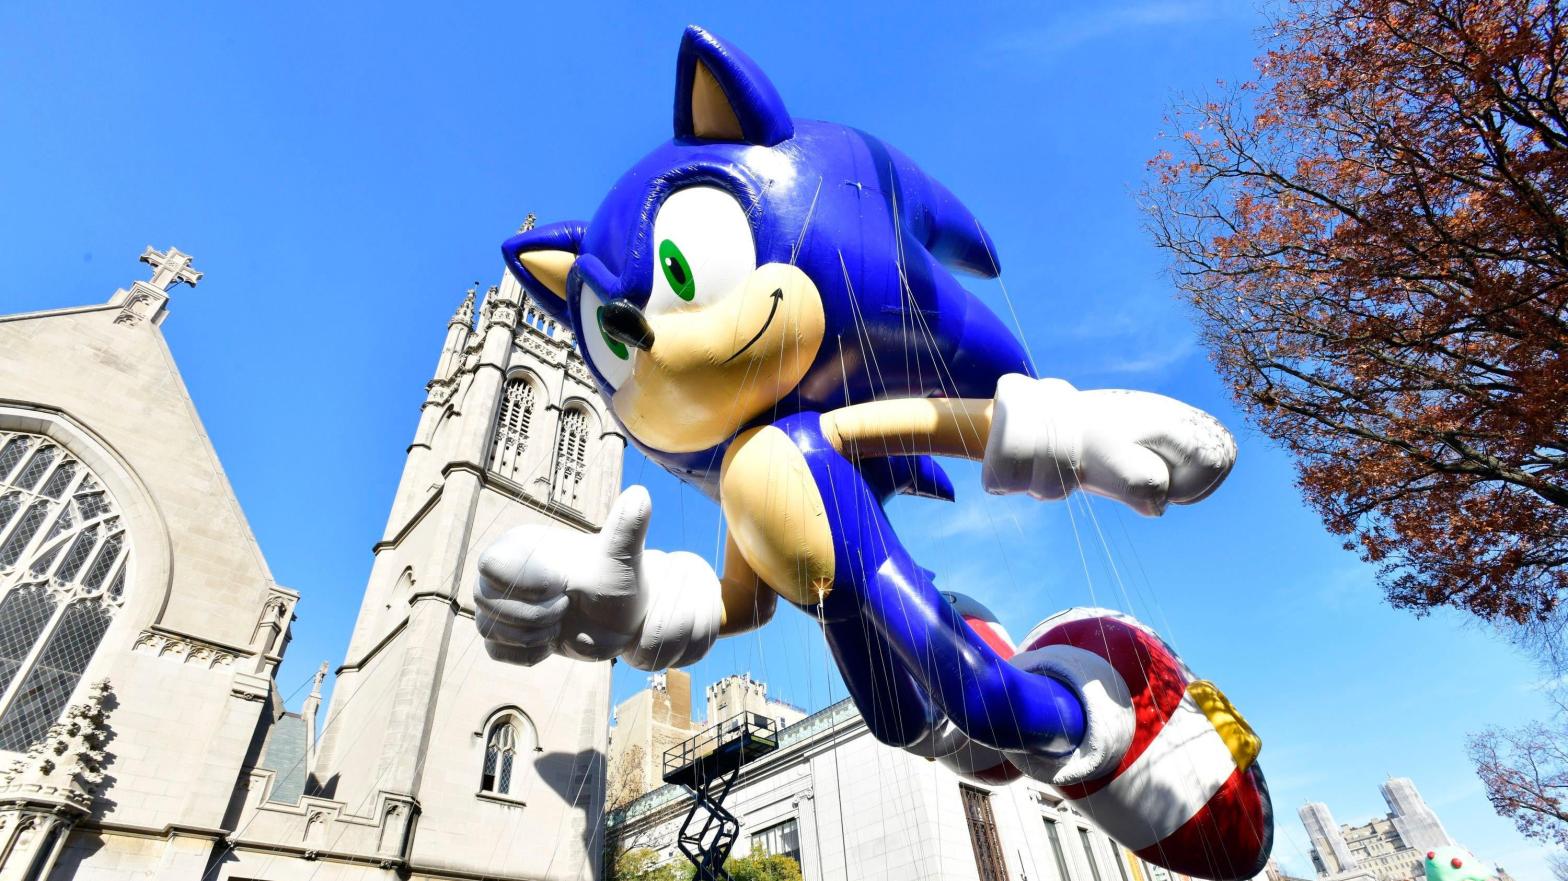 Sega's dreams to make loads on NFTs and blockchain tech seem to be floating away. (Photo: Eugene Gologursky, Getty Images)